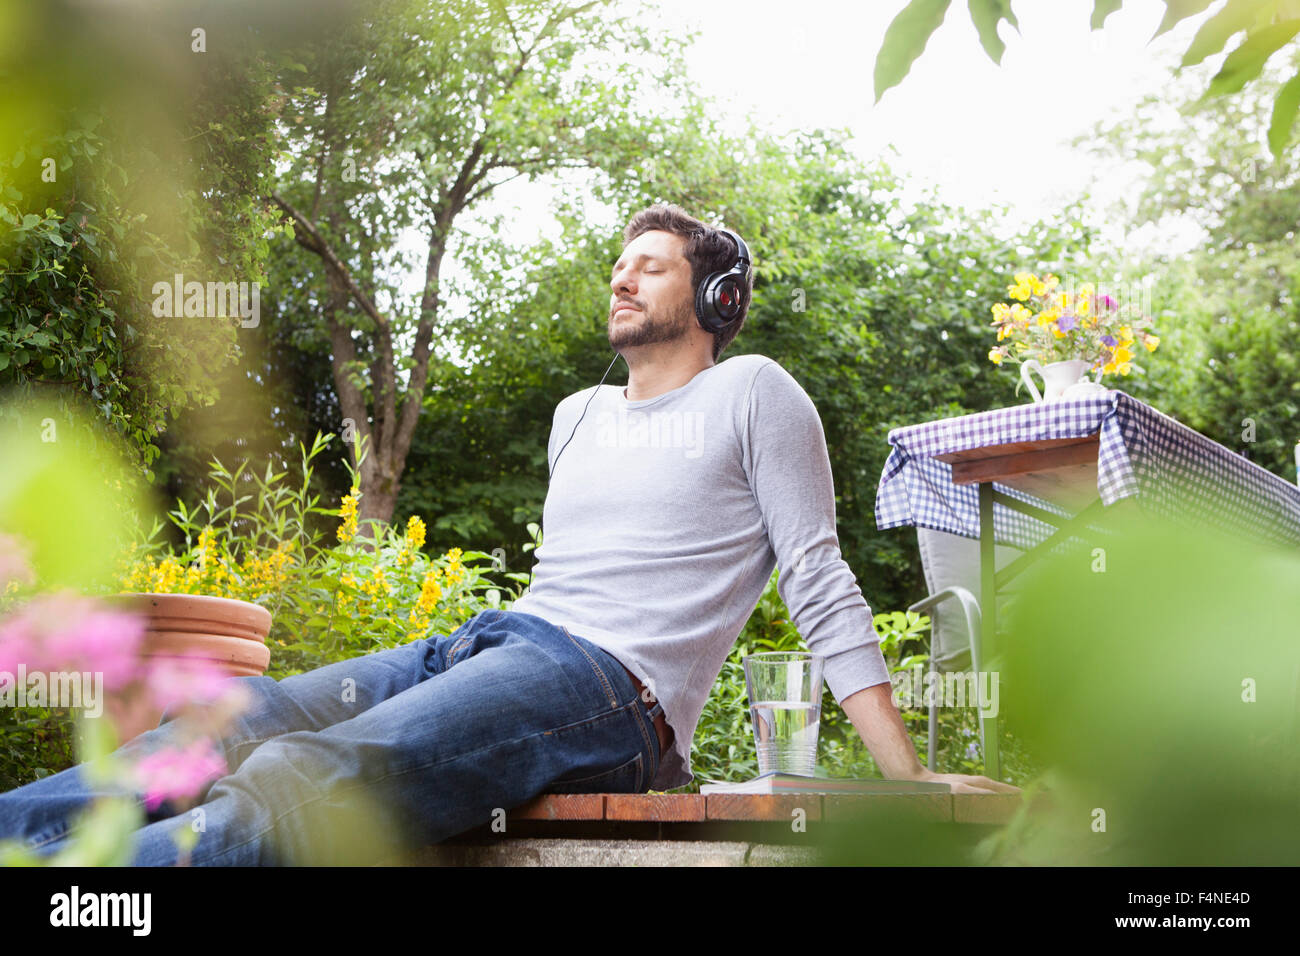 Relaxed man sitting in garden with headphones Stock Photo